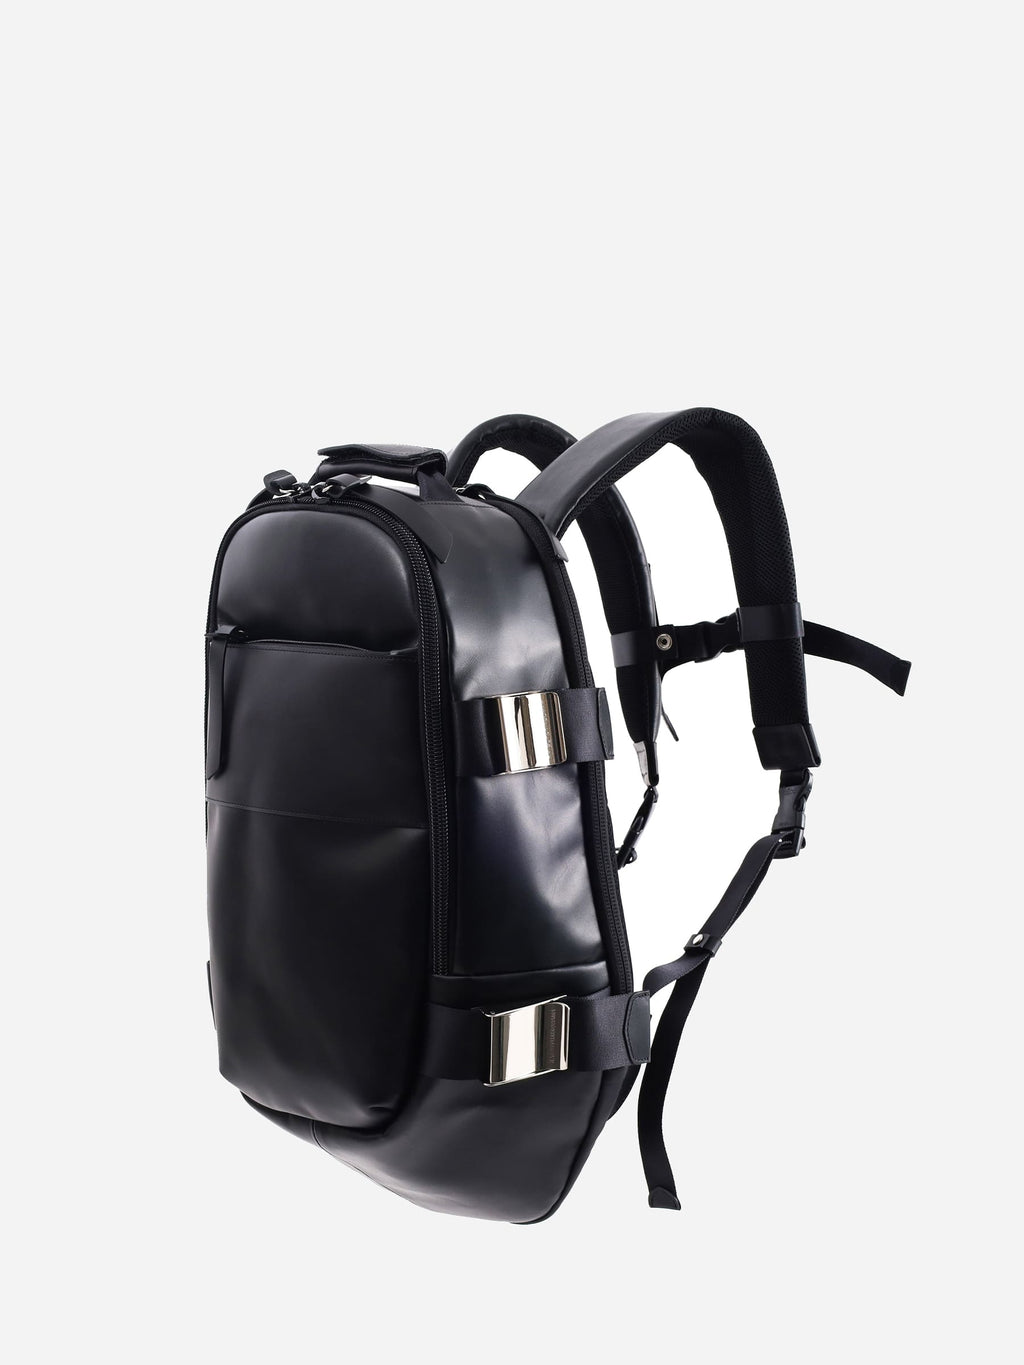 PACK-2 leatherbackpack (for 16inch pc) 洋服好きにお薦めなカツユキ